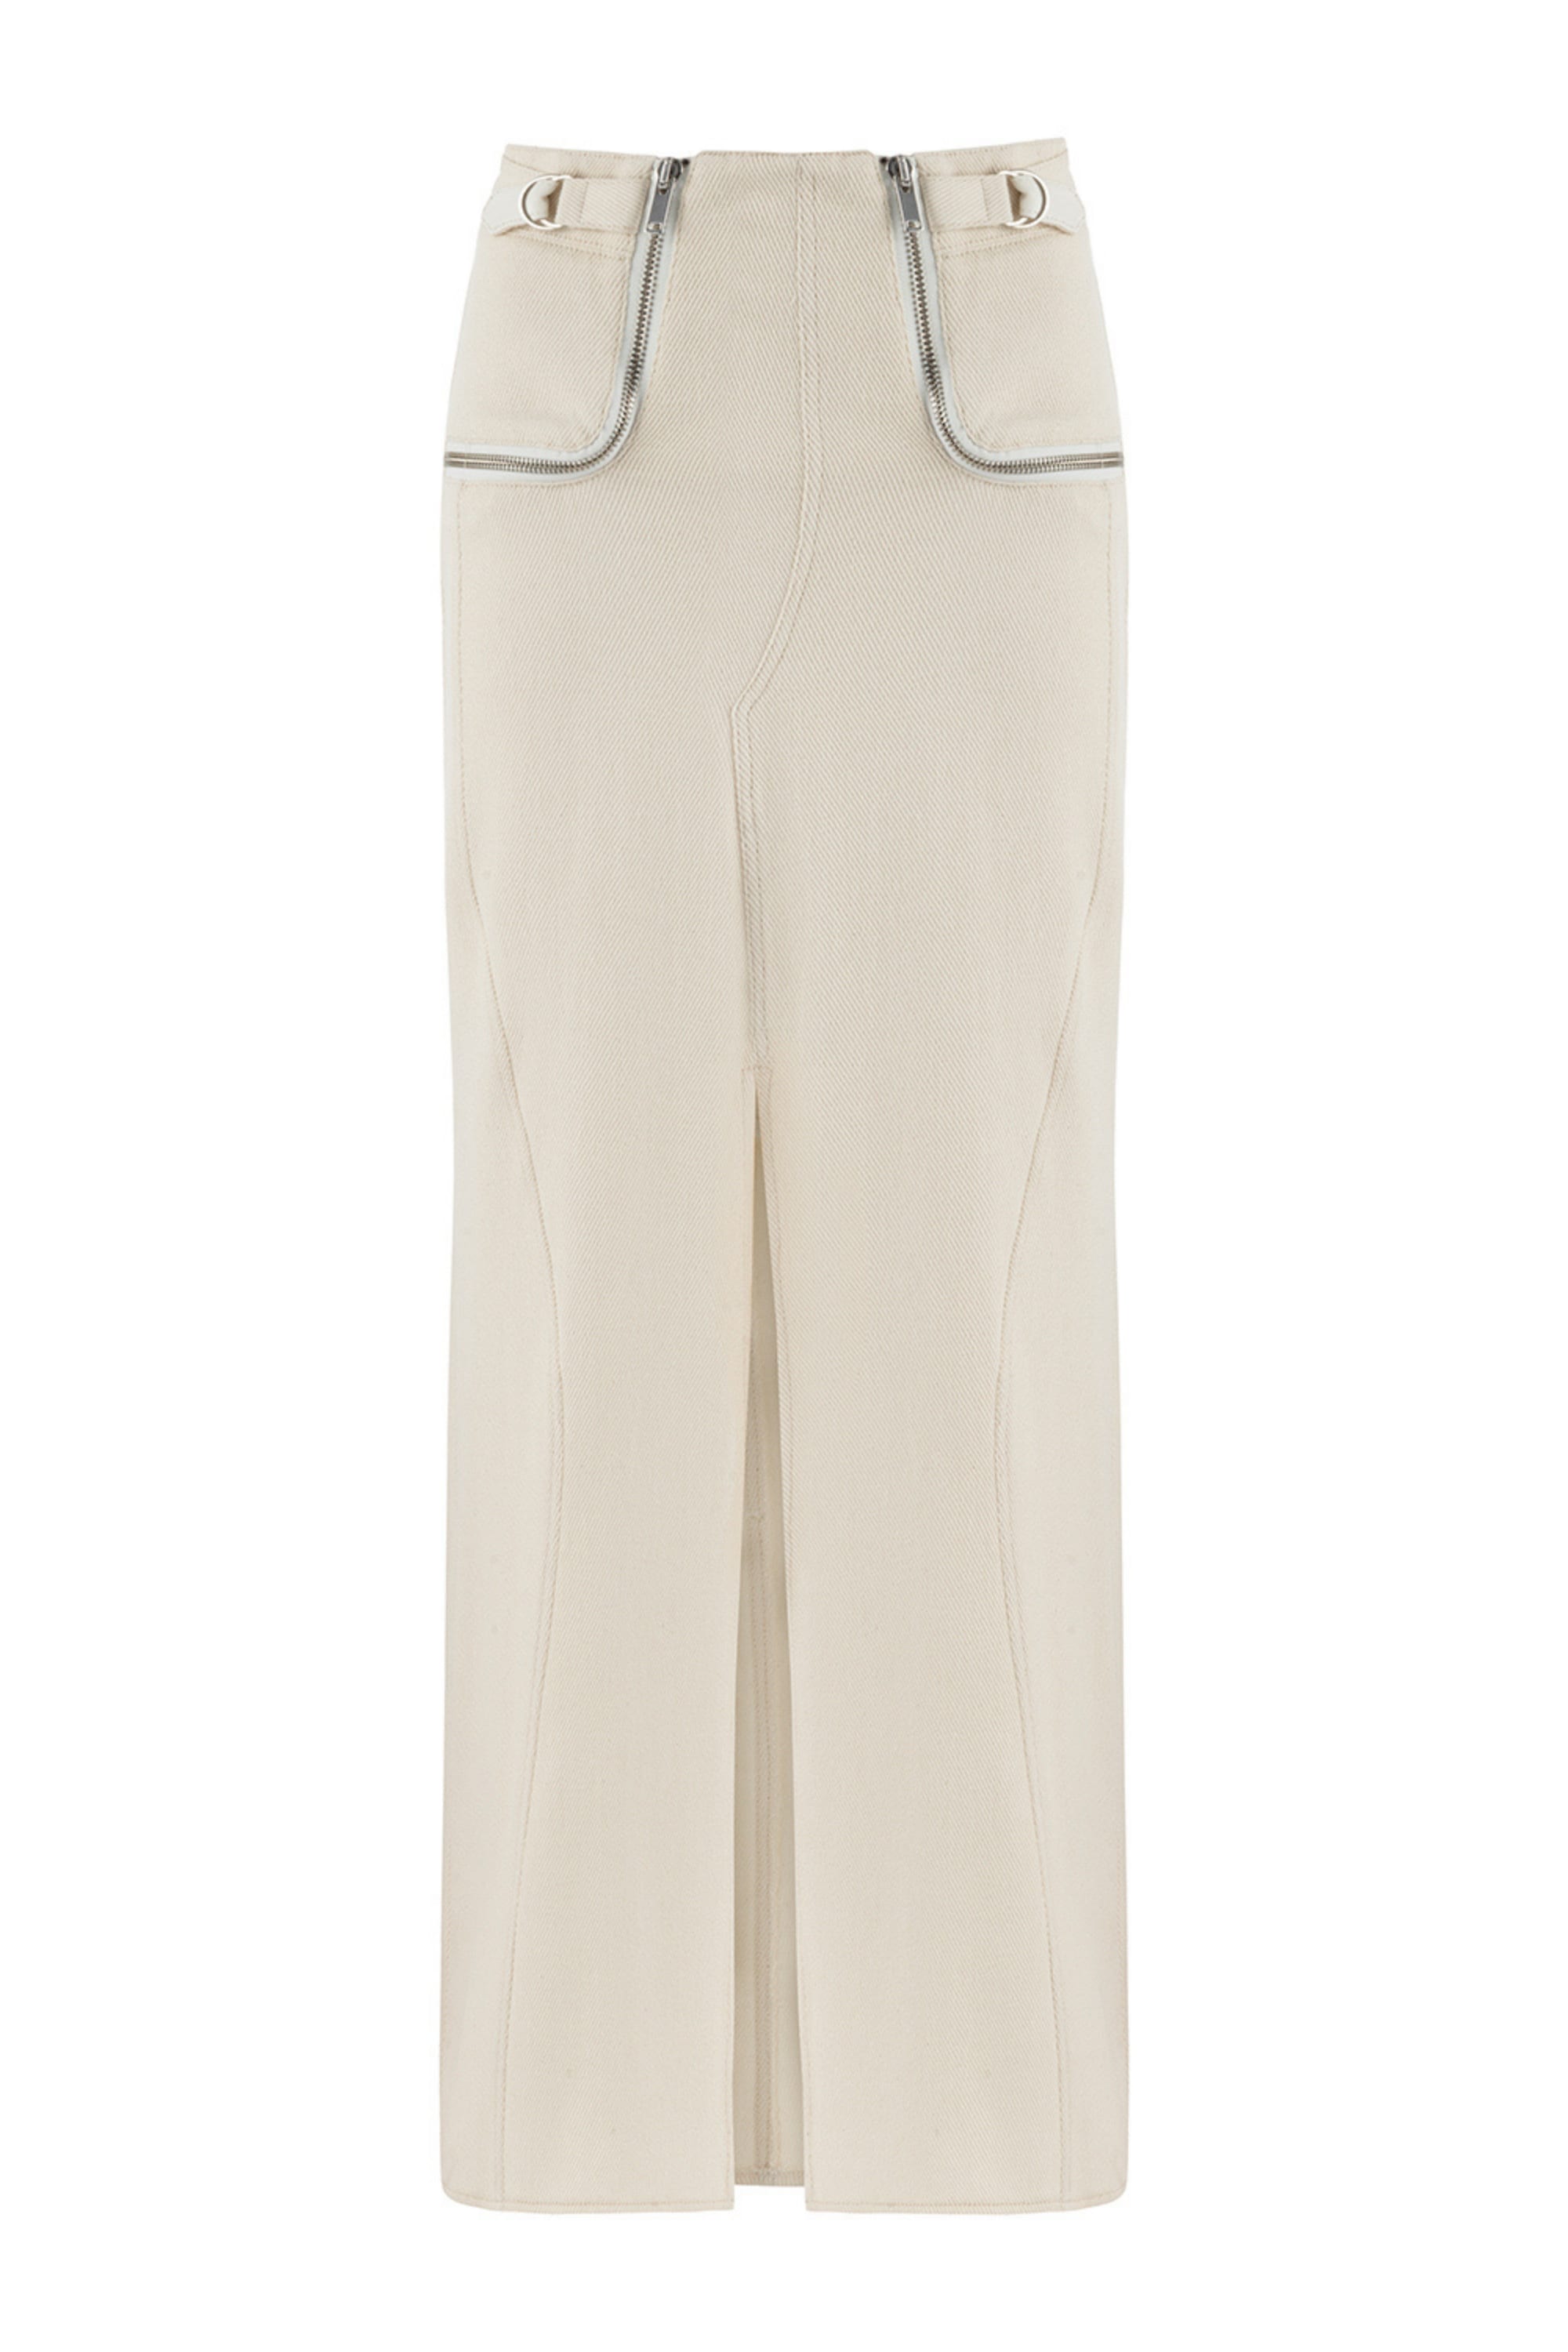 Nocturne Women's Long Skirt With Zipper Detail-white In Neutral